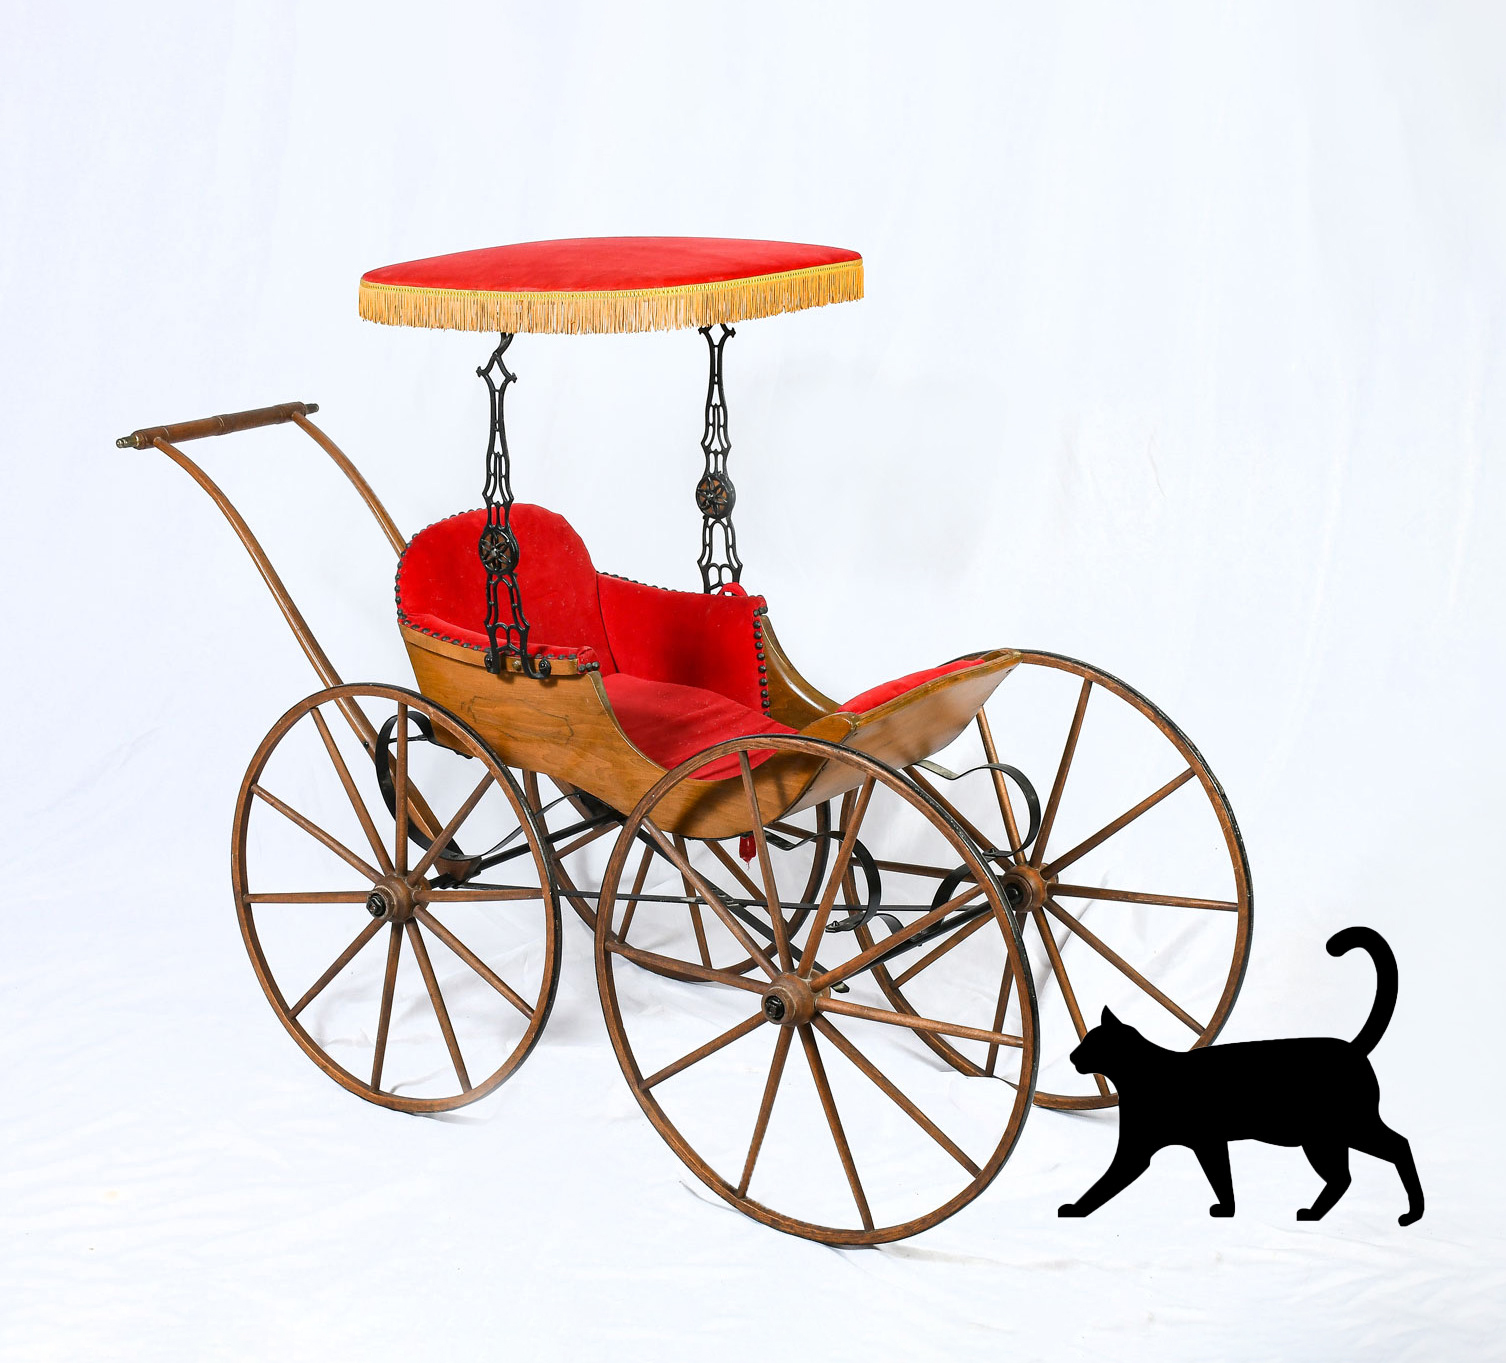 MID-19TH CENTURY VICTORIAN BUGGY: